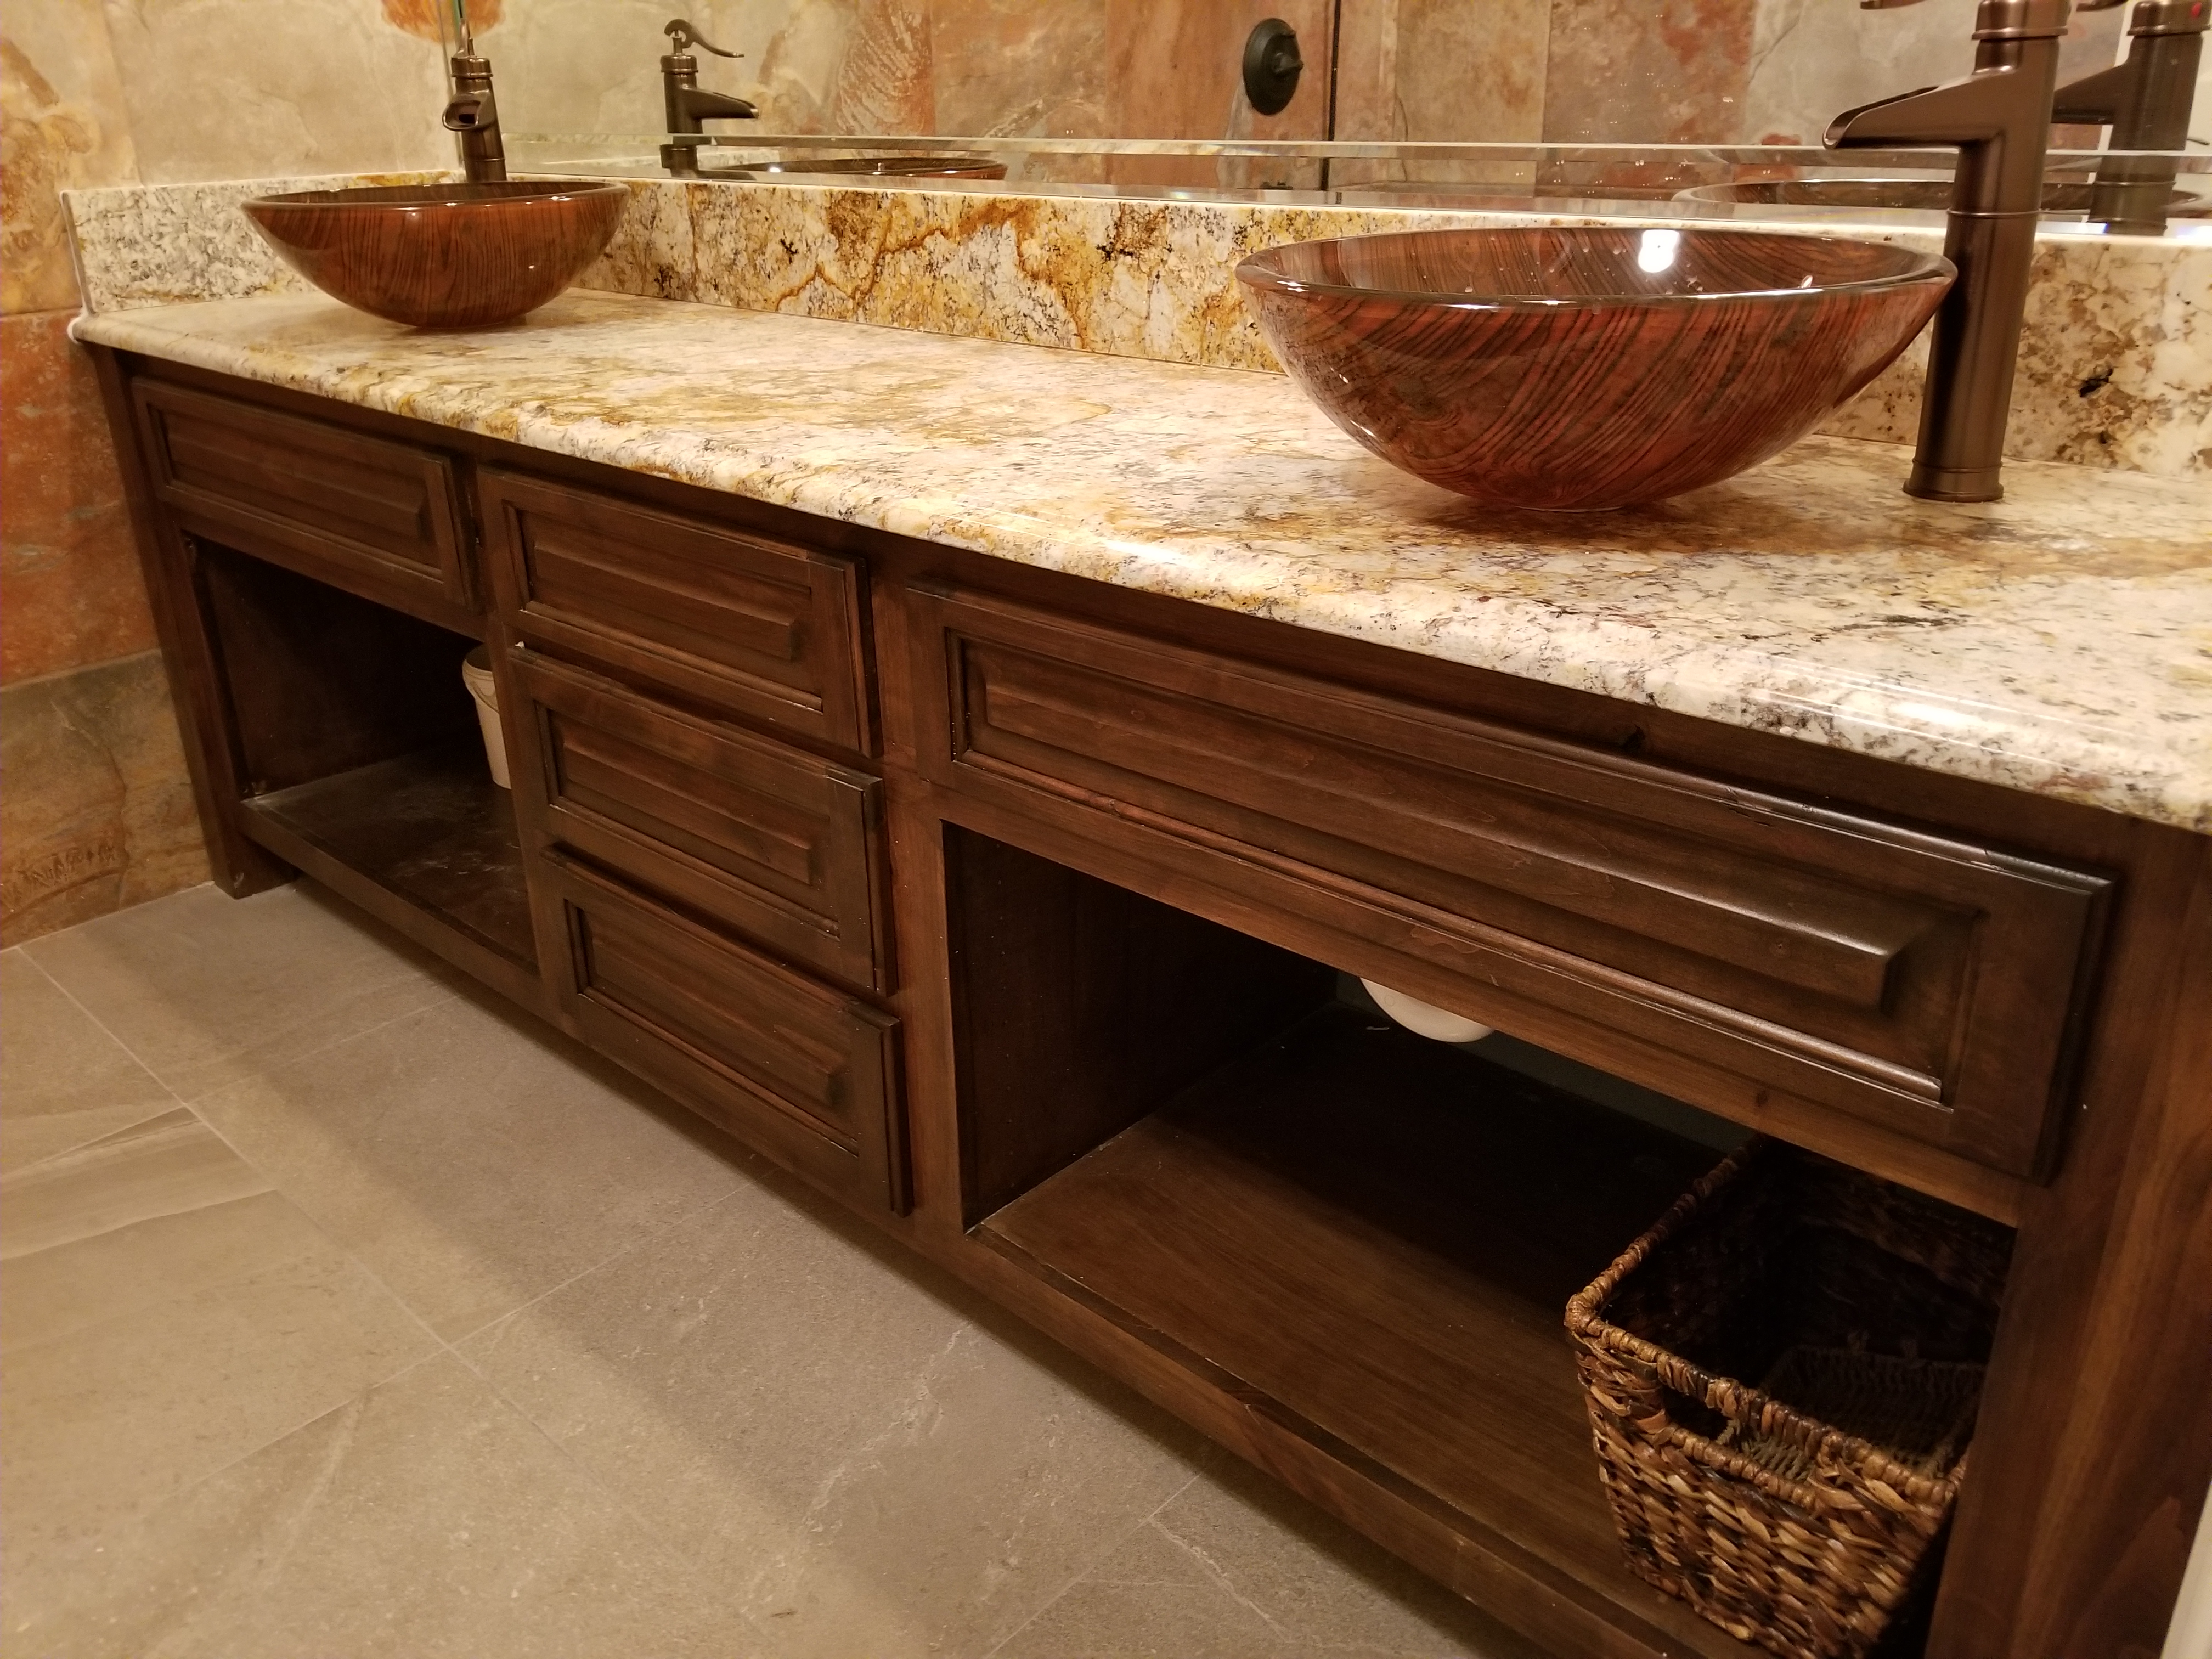 bathroom with new counter-tops and cabinets